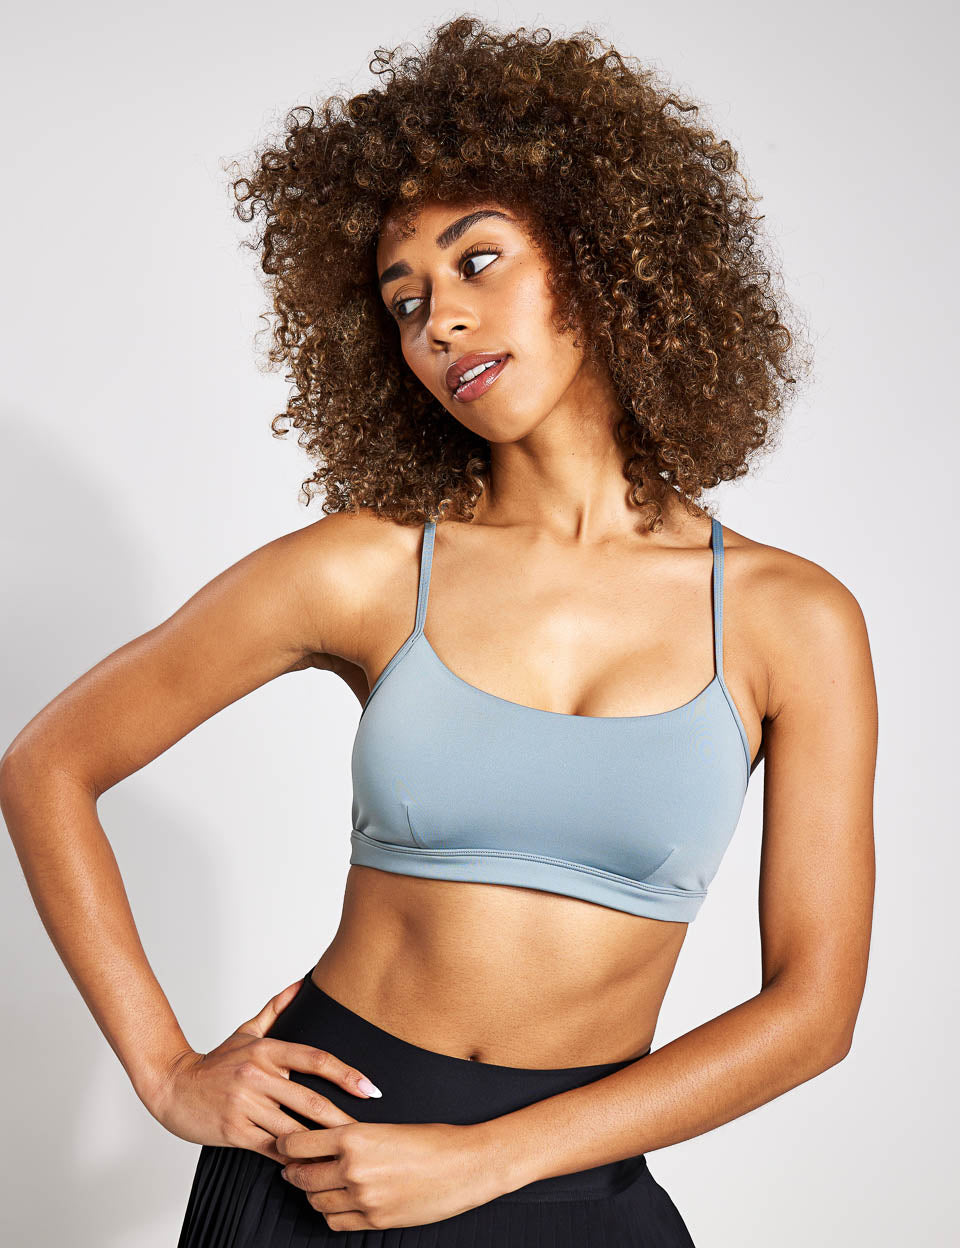 Airlift Intrigue Bra in Dark Cactus by Alo Yoga - International